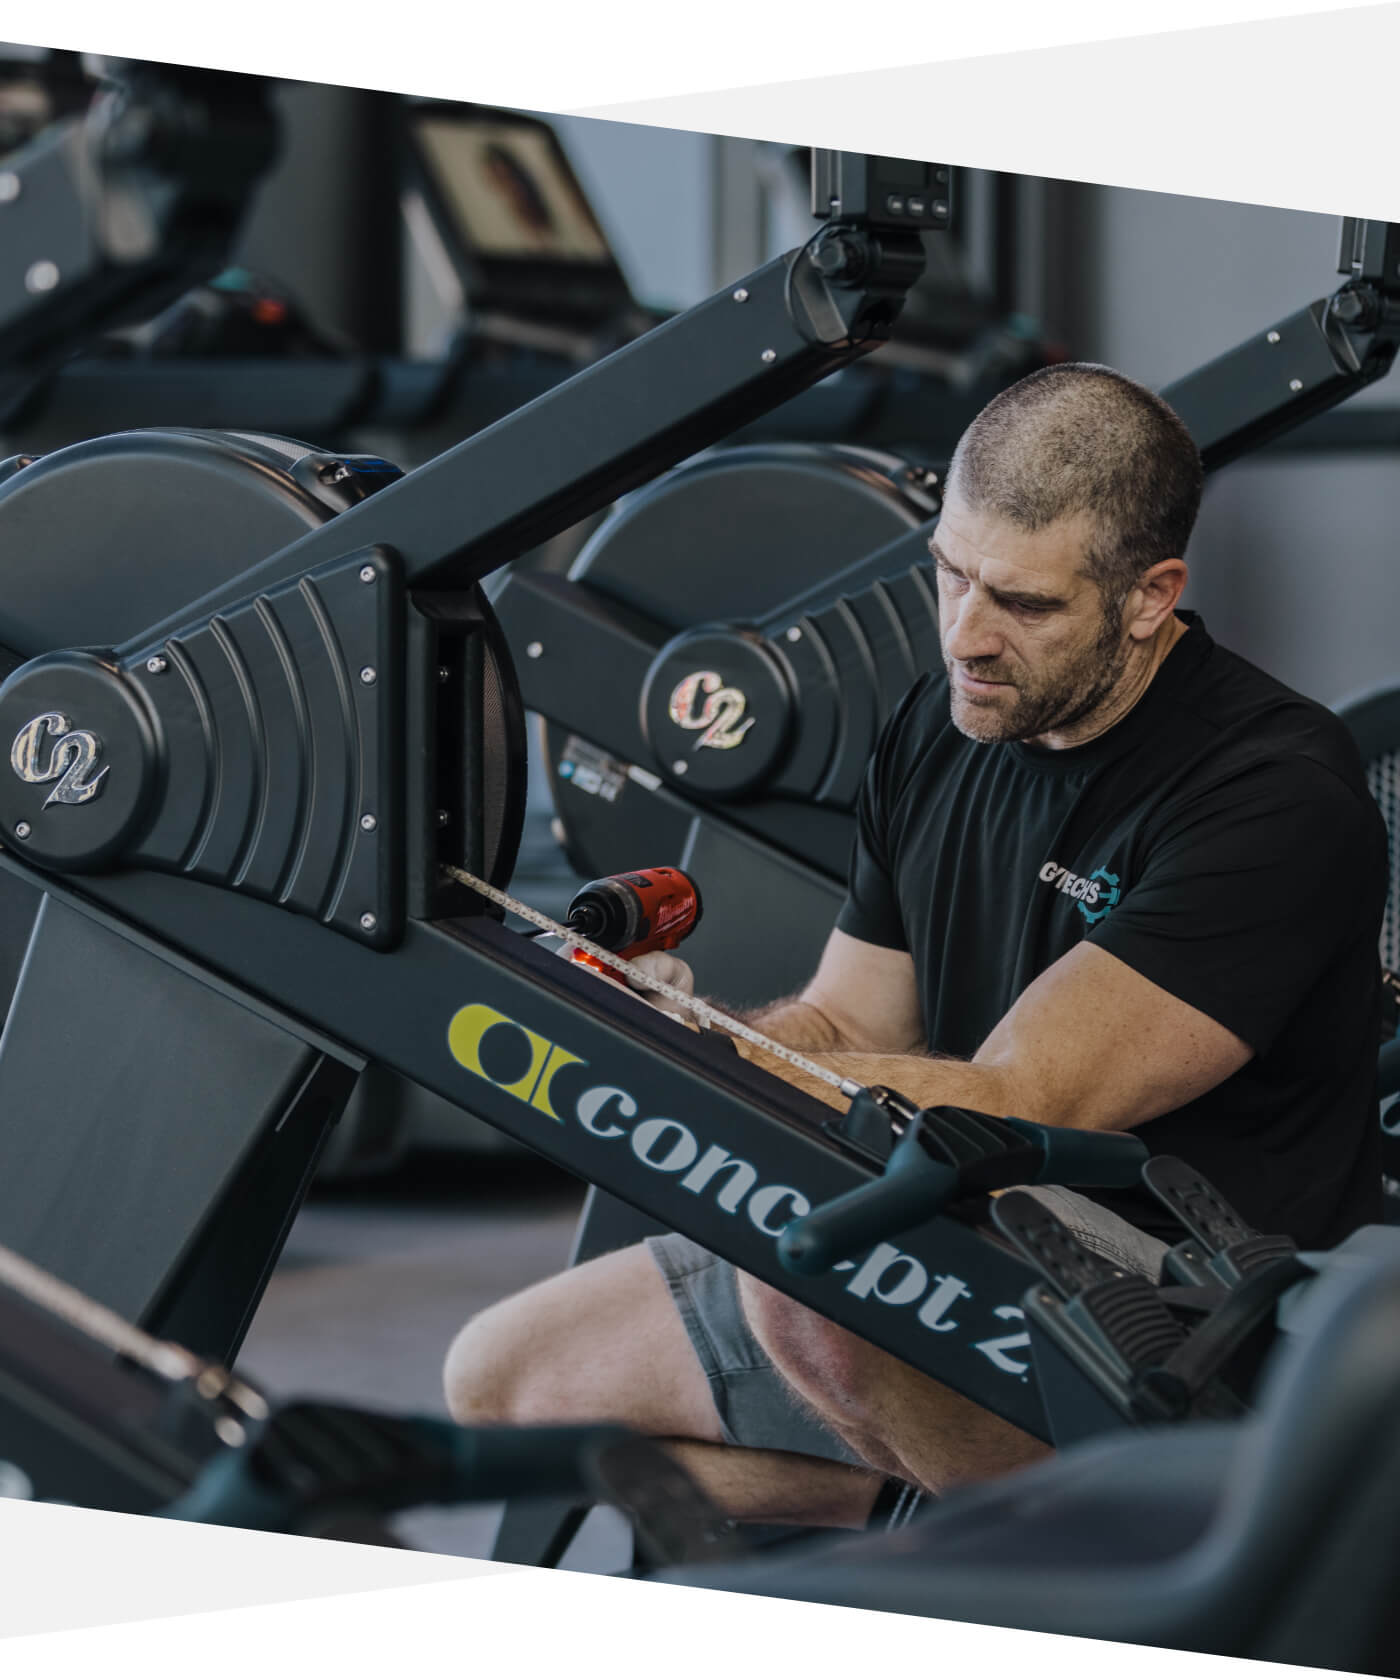 Commercial gyms rowing machine repairs